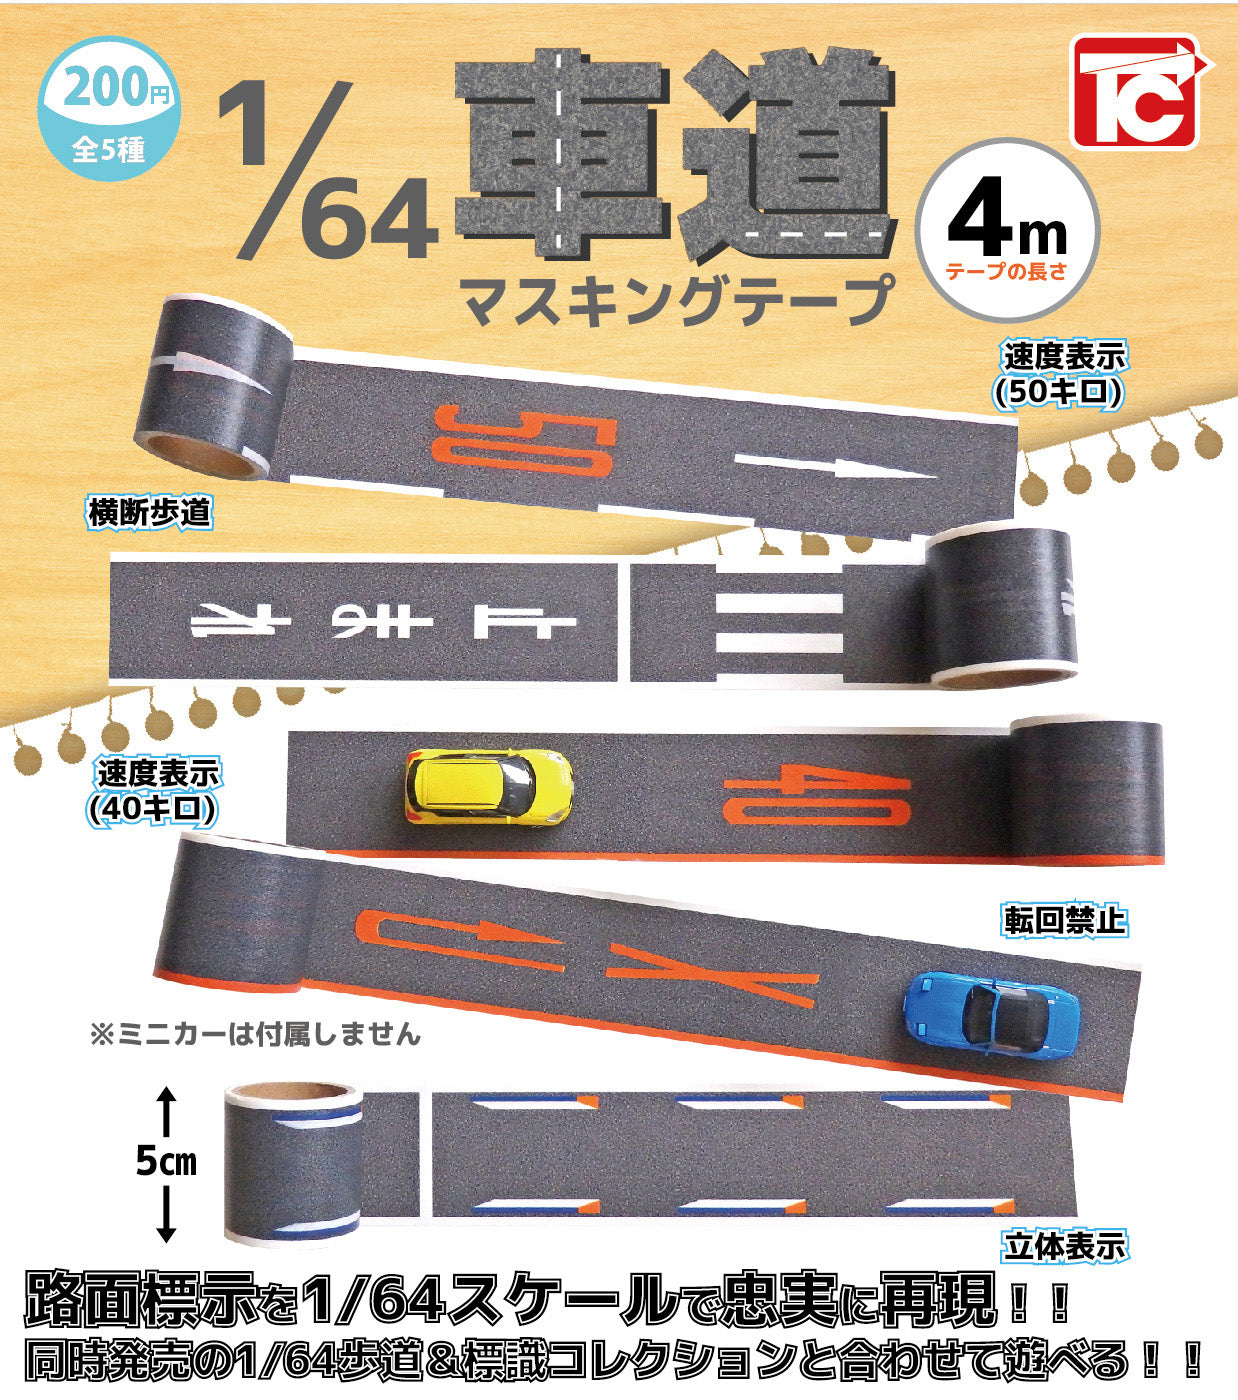 1/64 Scale Road Masking Tape